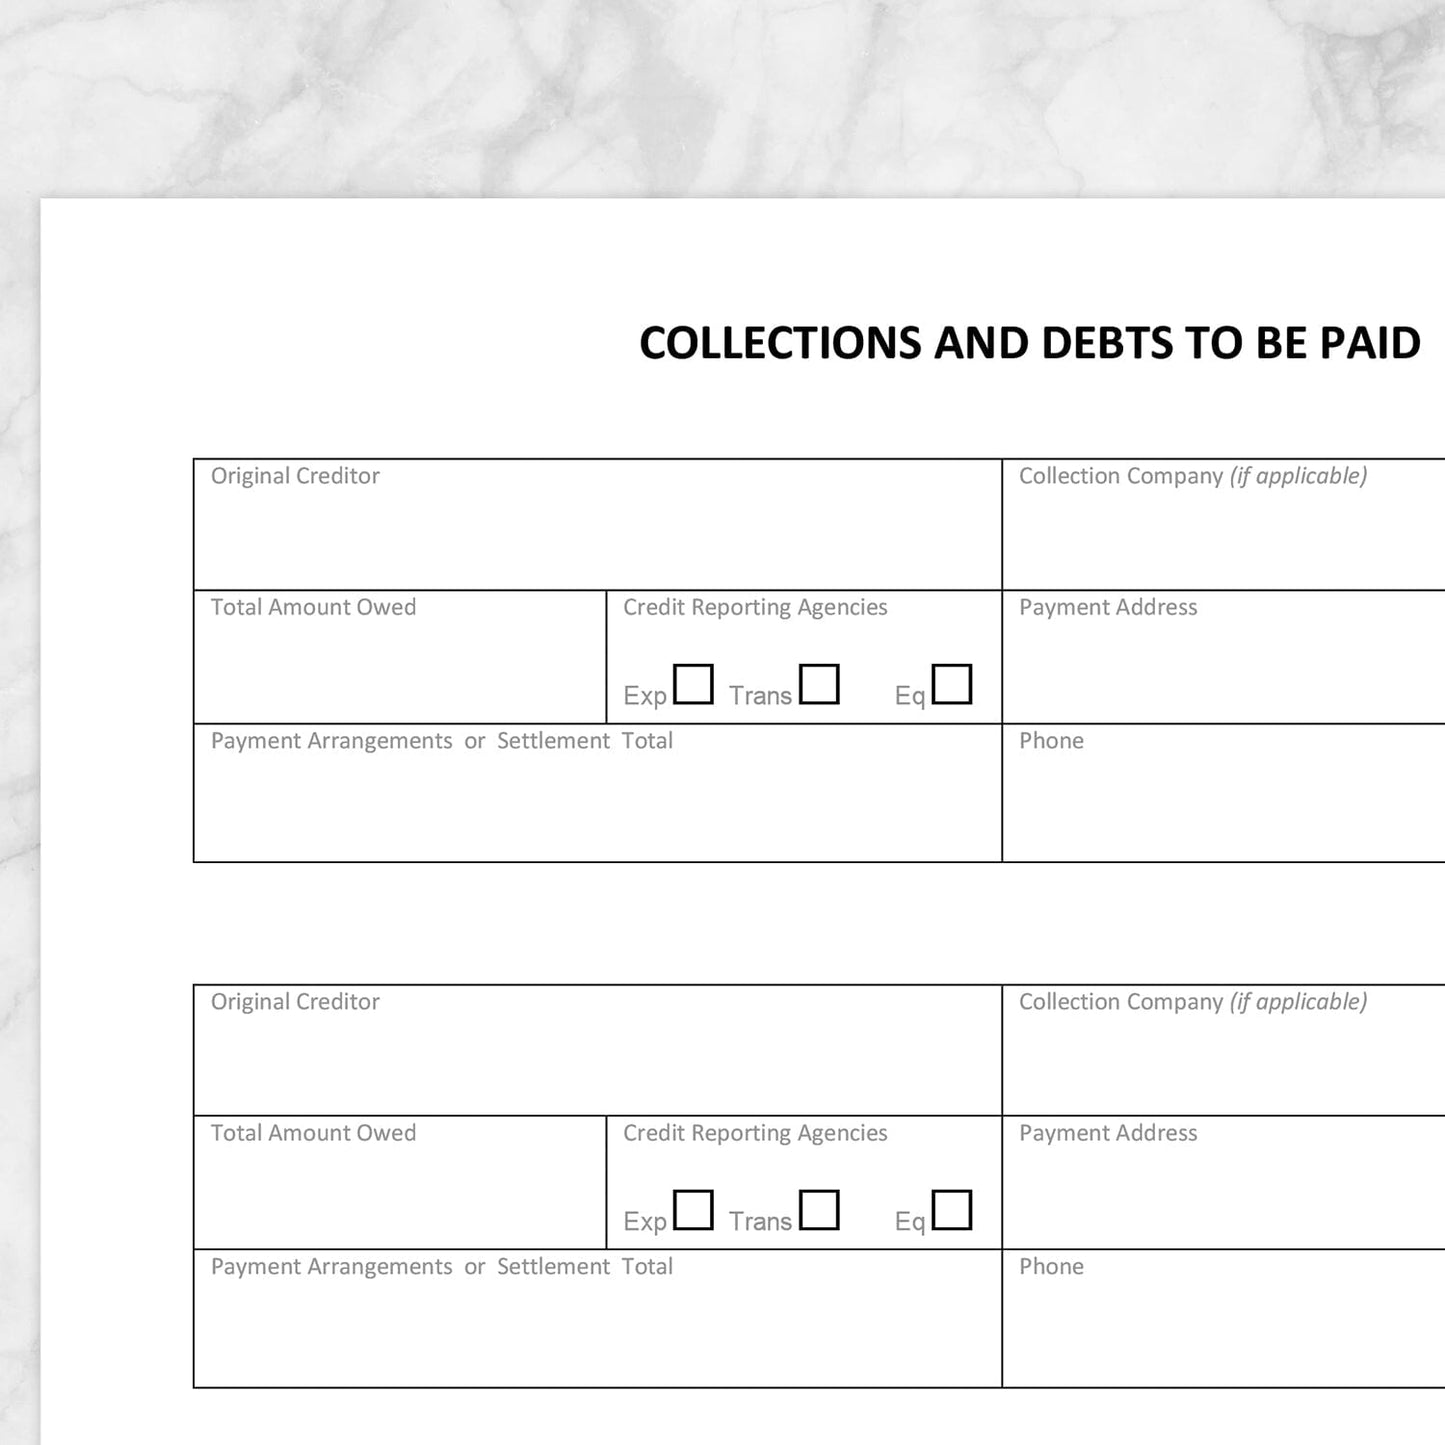 Printable Collections and Debts to be Paid - Tracking Sheet at Printable Planning. Closer view of the page.